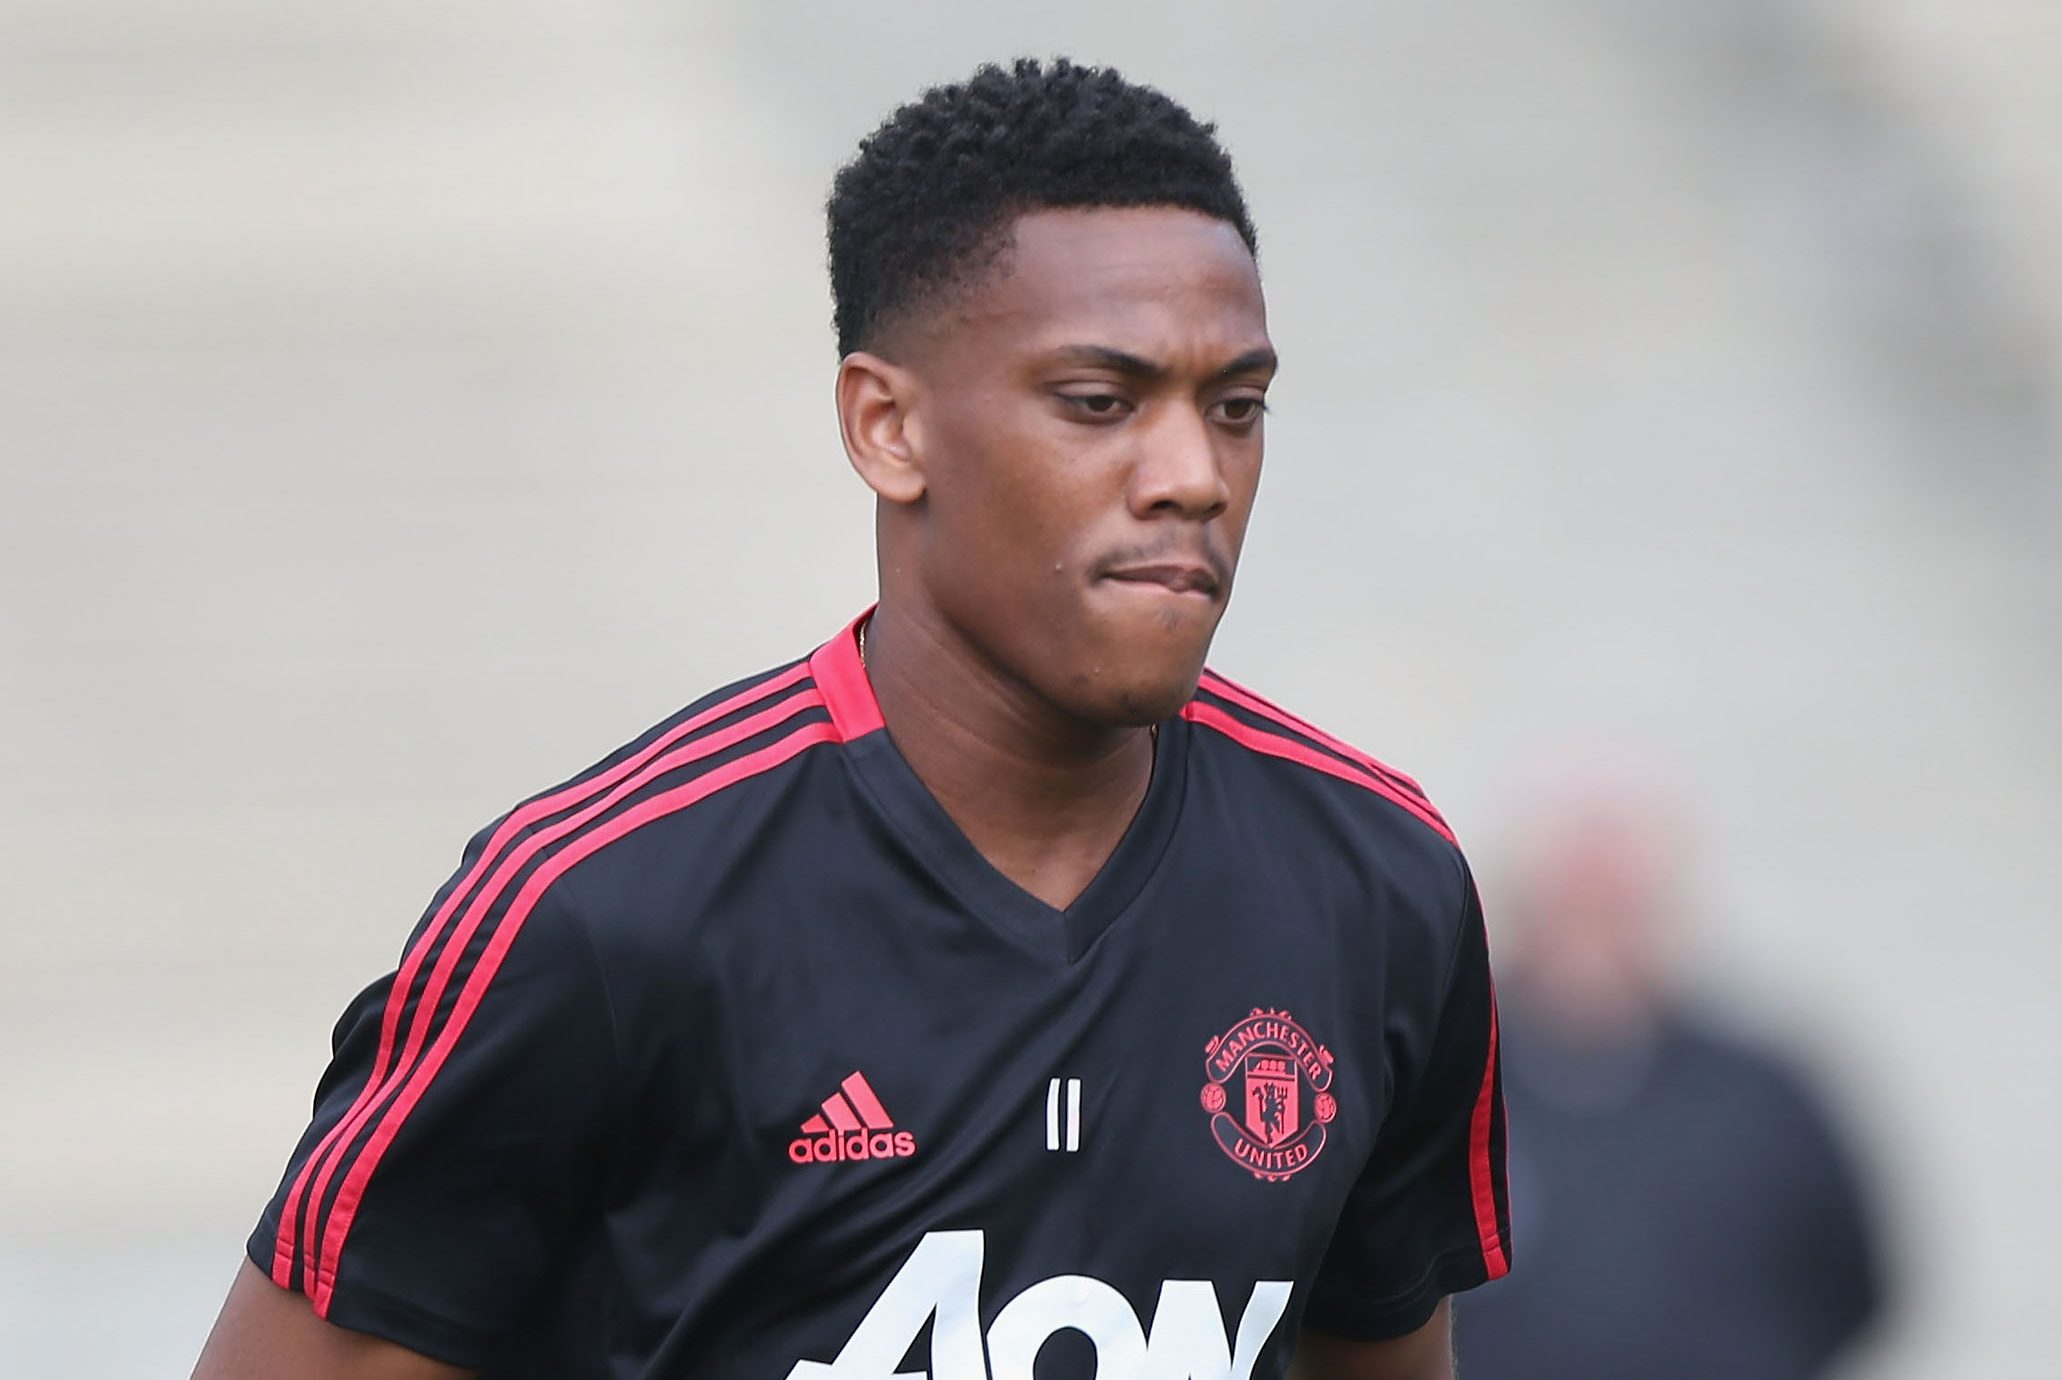 Bayern Munich rule out transfer move for Manchester United misfit Anthony Martial